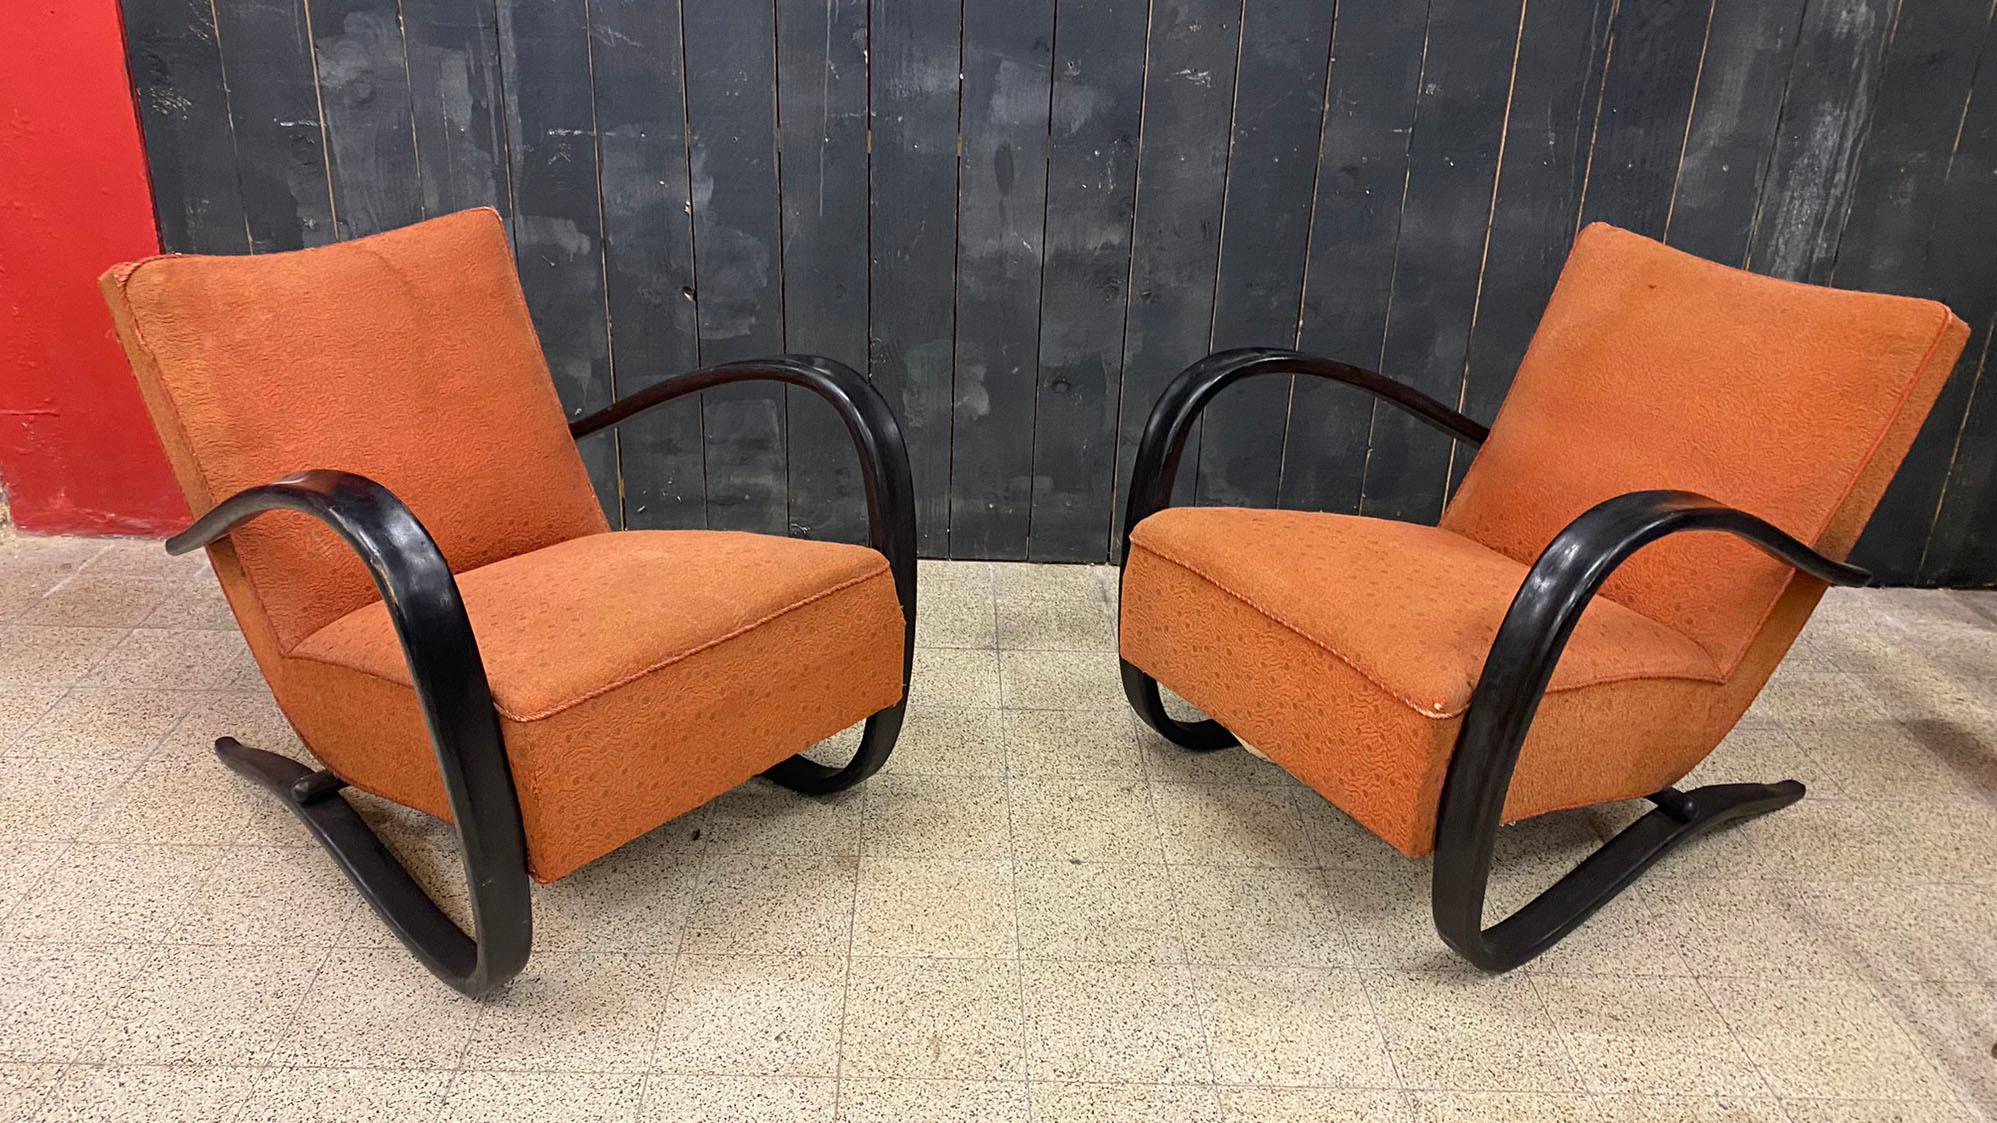 Jindrich Halabala H-269 Armchairs
the wood has a very nice patina, the fabric needs to be redone